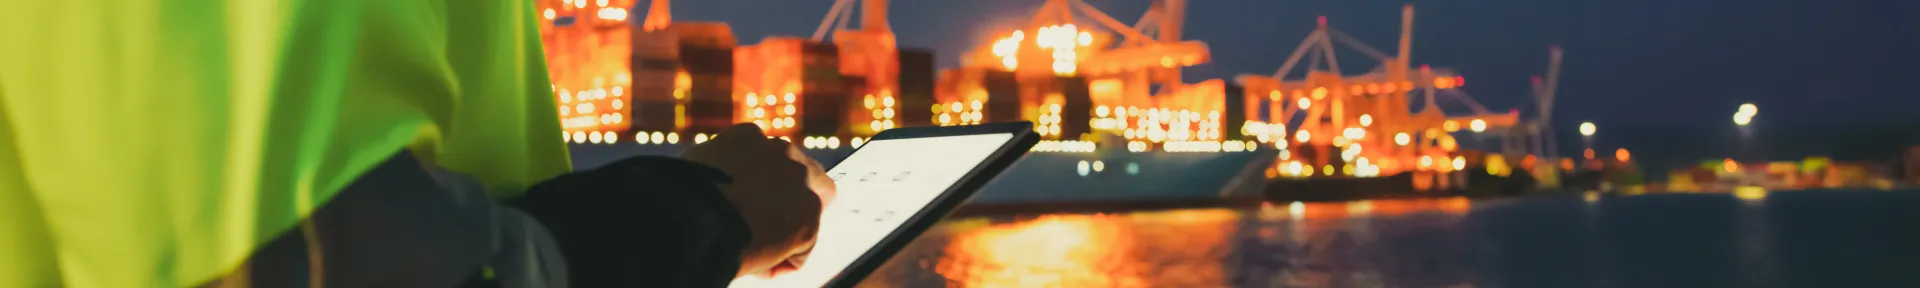 Man at a harbour on ipad at night